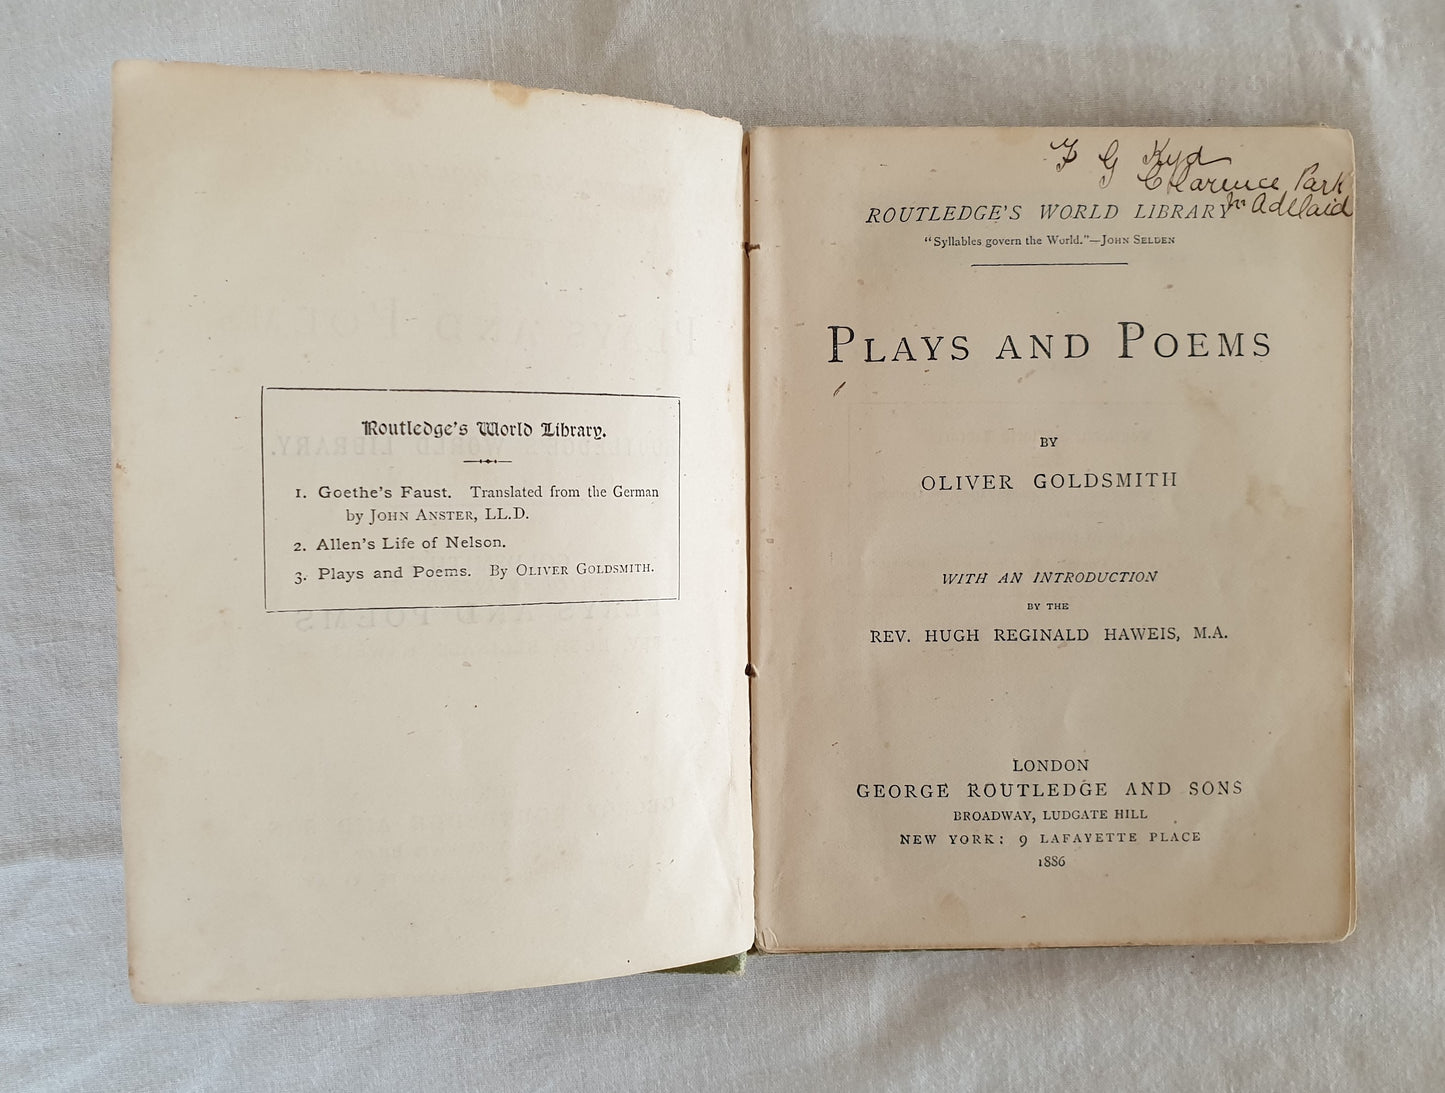 Plays and Poems by Oliver Goldsmith